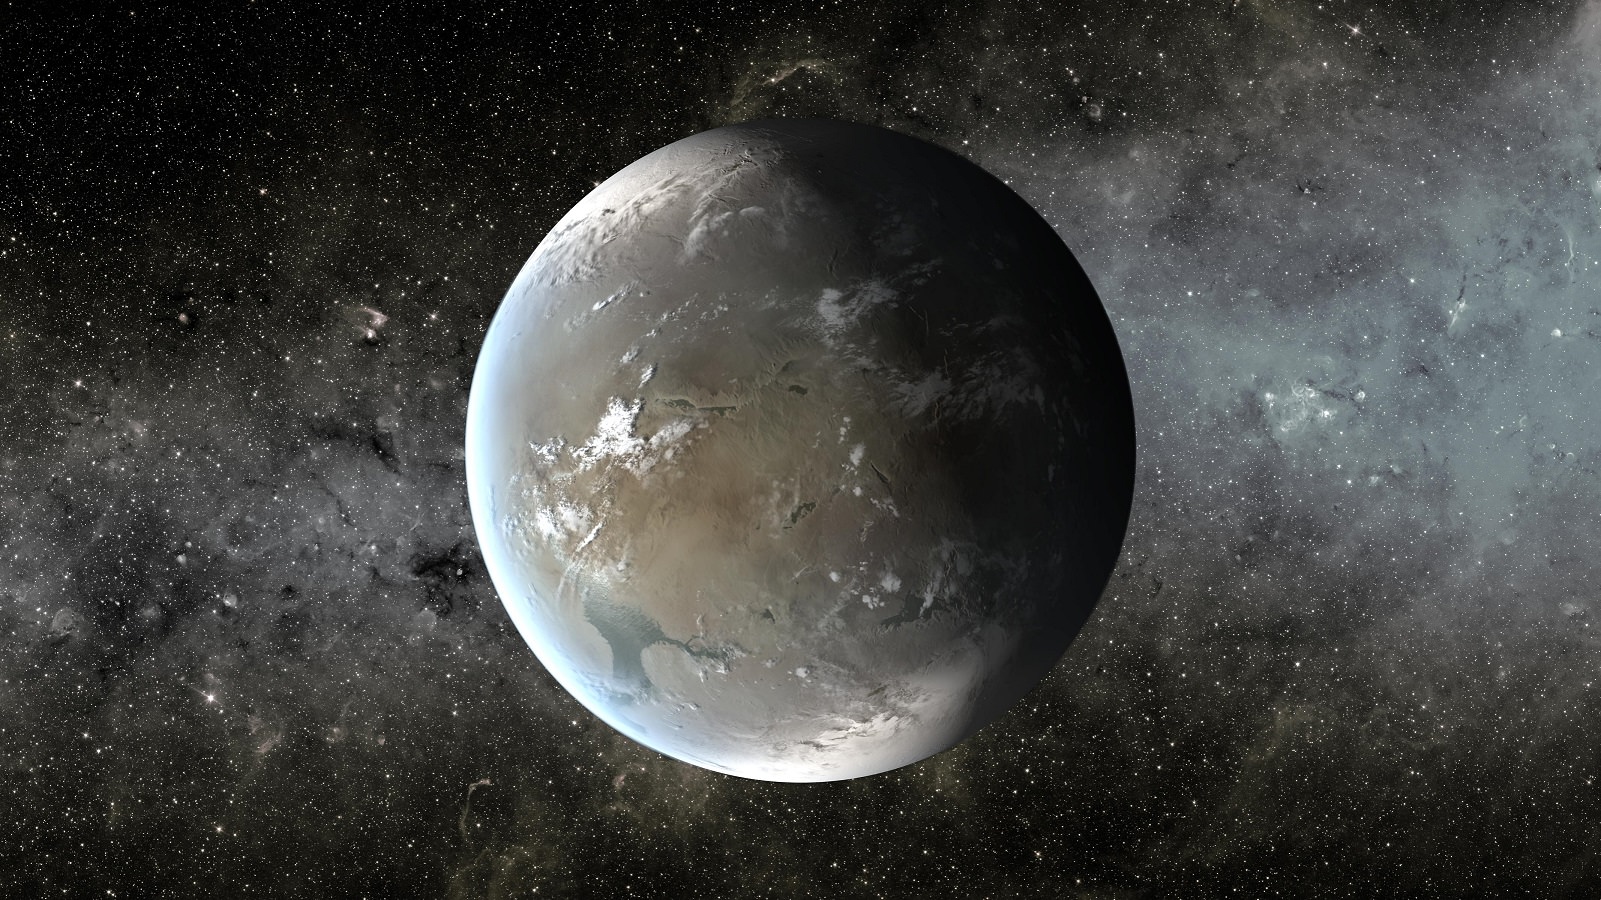 Artists impression of a Super-Earth, a class of planet that has many times the mass of Earth, but less than a Uranus or Neptune-sized planet. Credit: NASA/Ames/JPL-Caltech